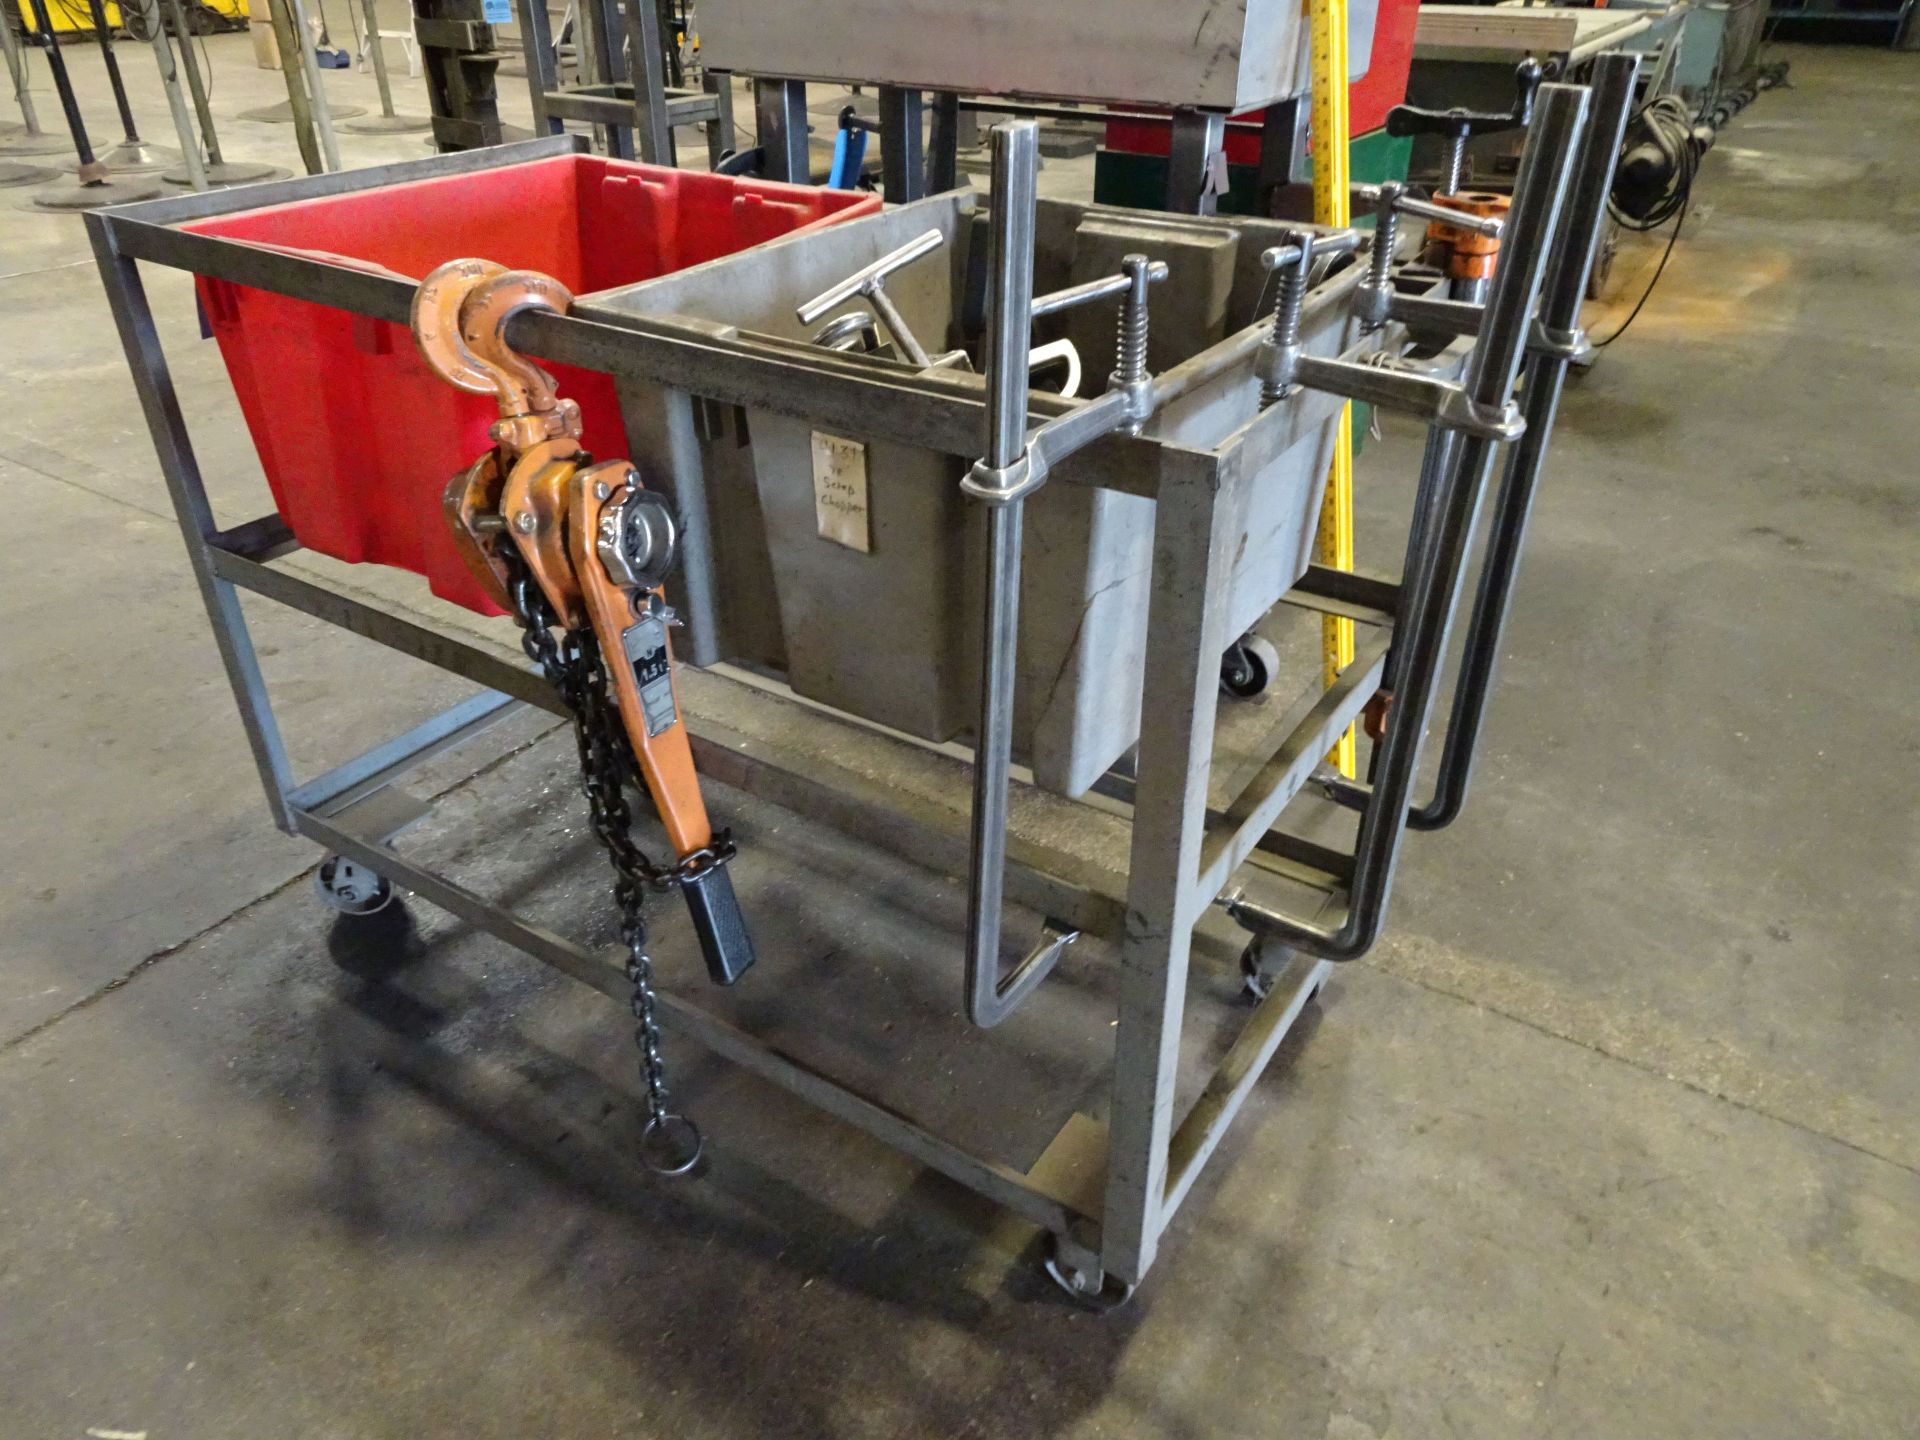 (LOT) MISCELLANEOUS C-CLAMPS, PLATE LIFTERS AND MAGNETIC SHEET LIFTER WITH CART - Image 4 of 4